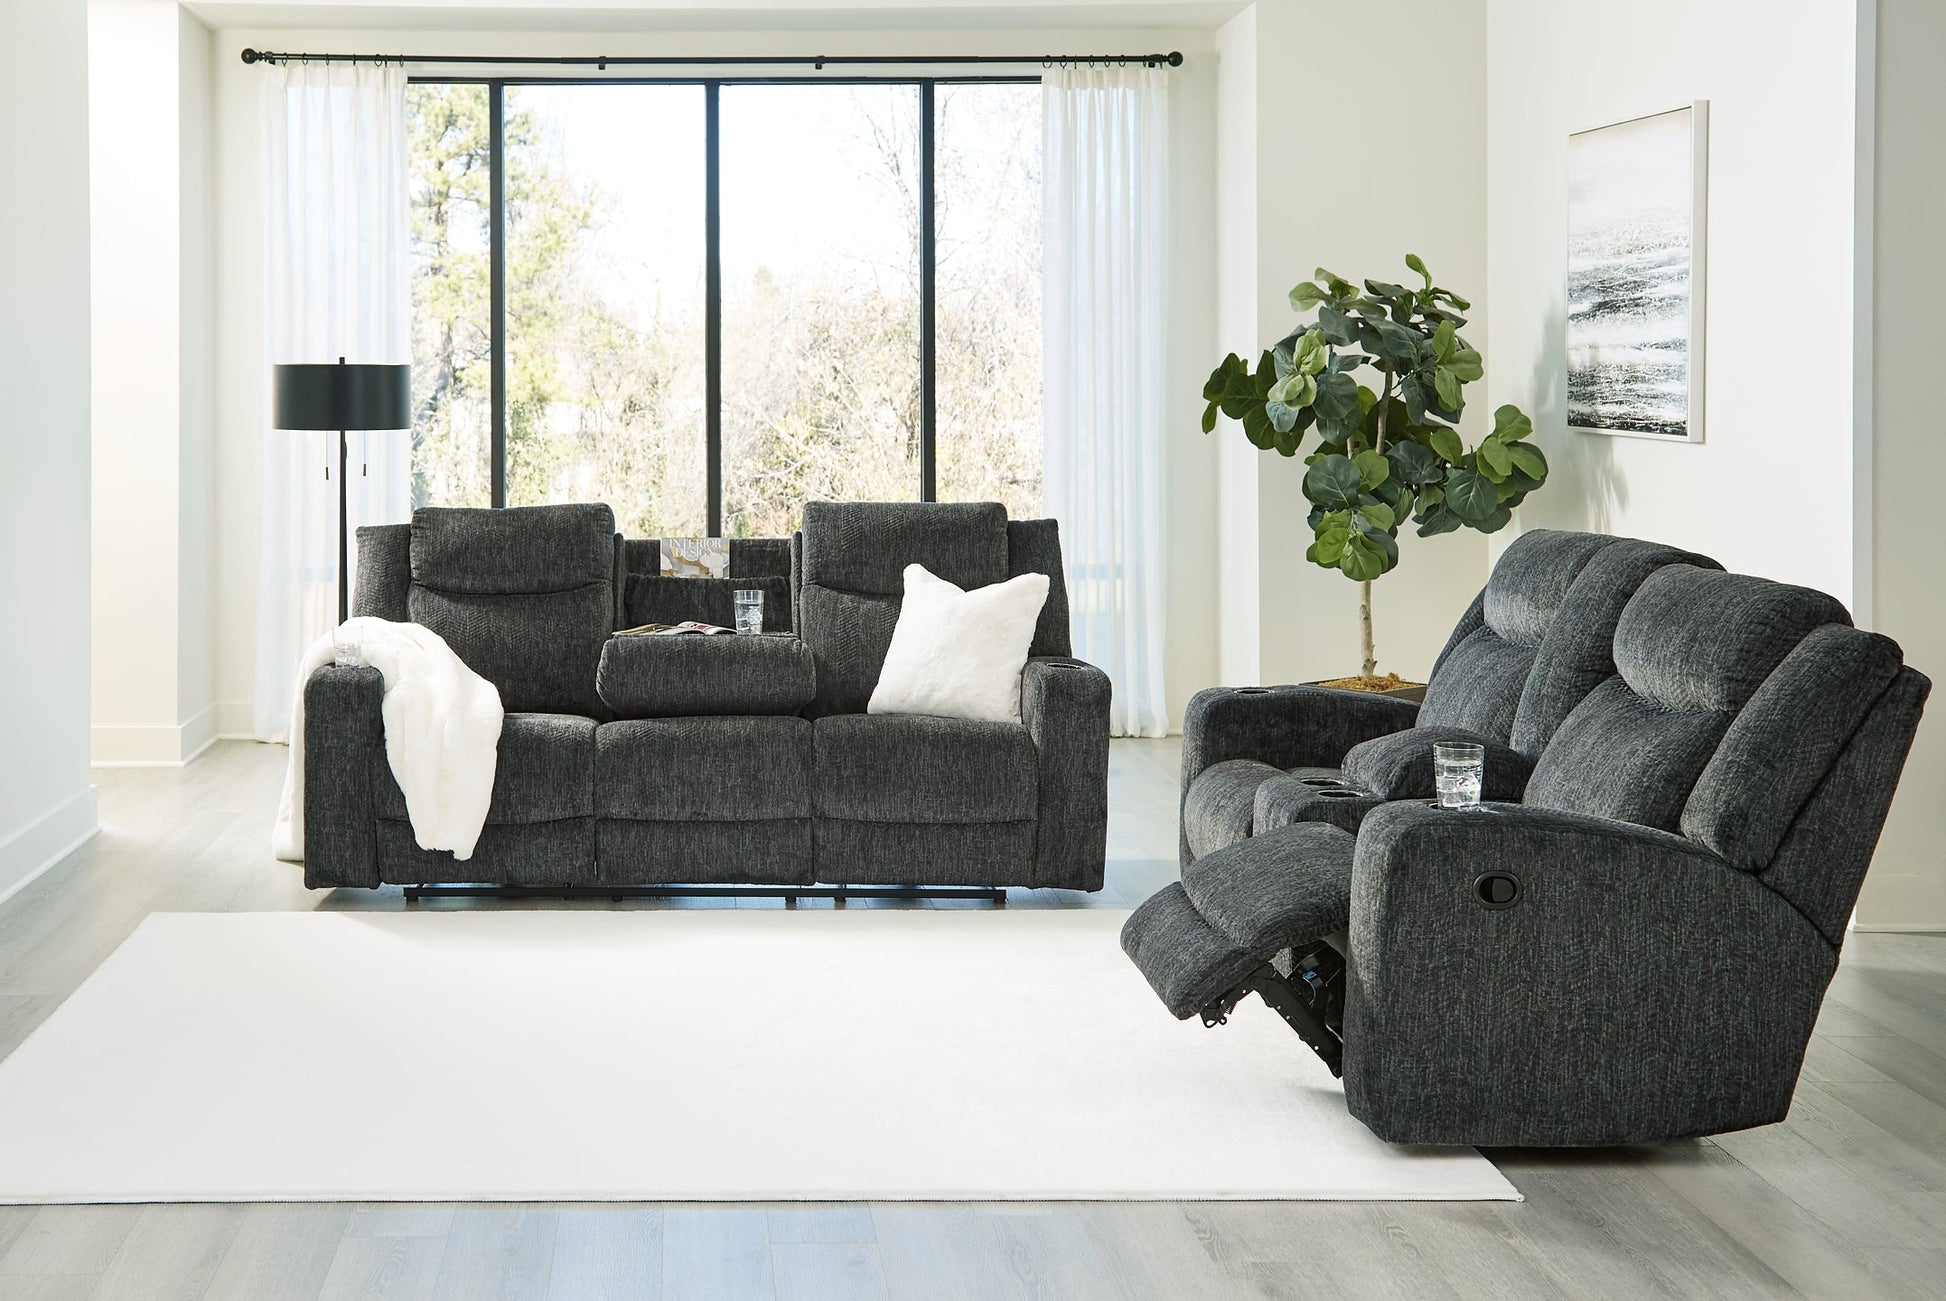 Martinglenn Sofa and Loveseat at Walker Mattress and Furniture Locations in Cedar Park and Belton TX.